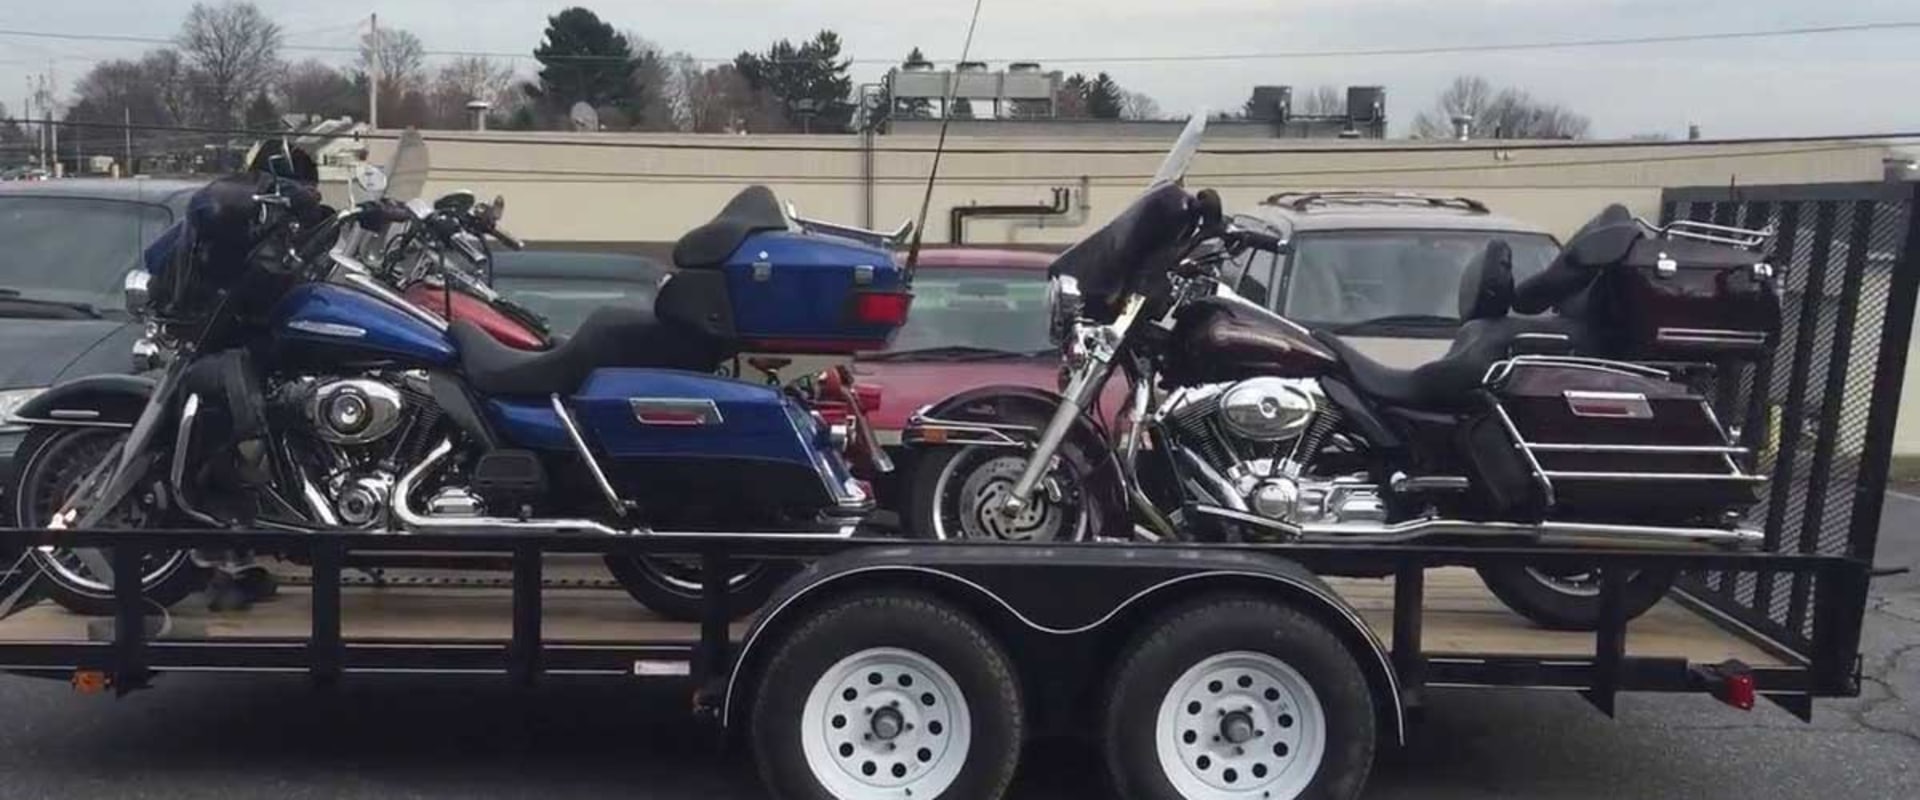 Can i ship my motorcycle with other motorcycles in the same shipment?